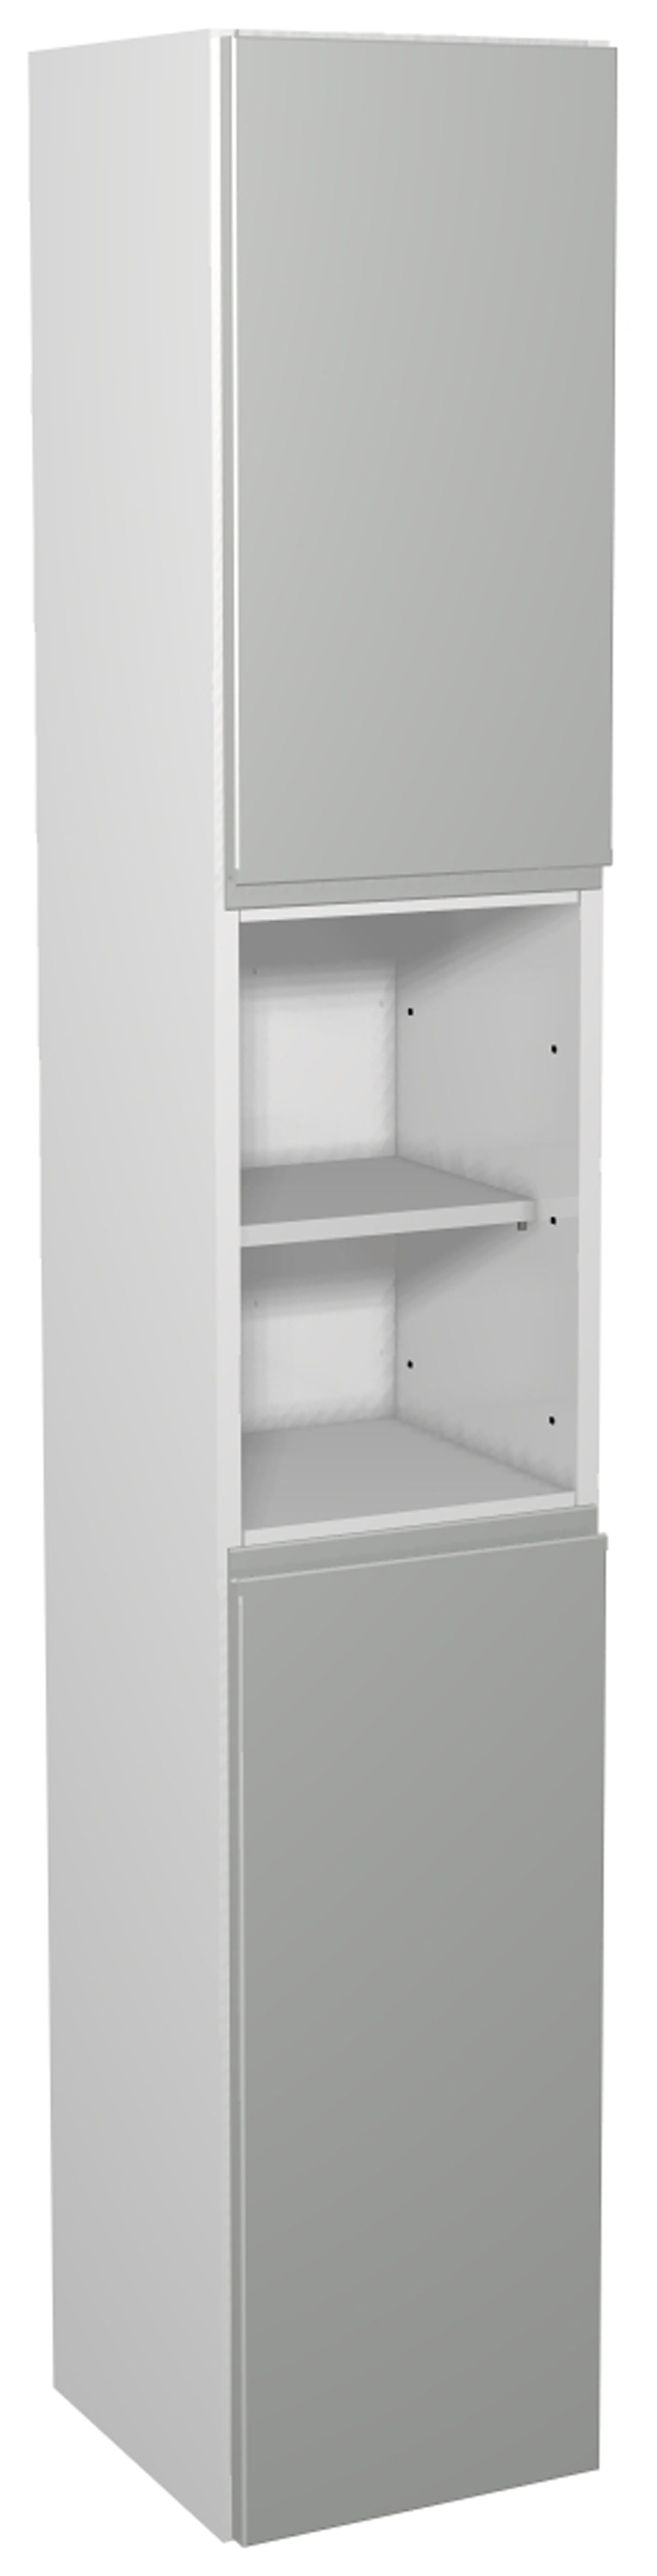 Image of Wickes Hertford Gloss Grey Tower Unit - 300 x 1762mm